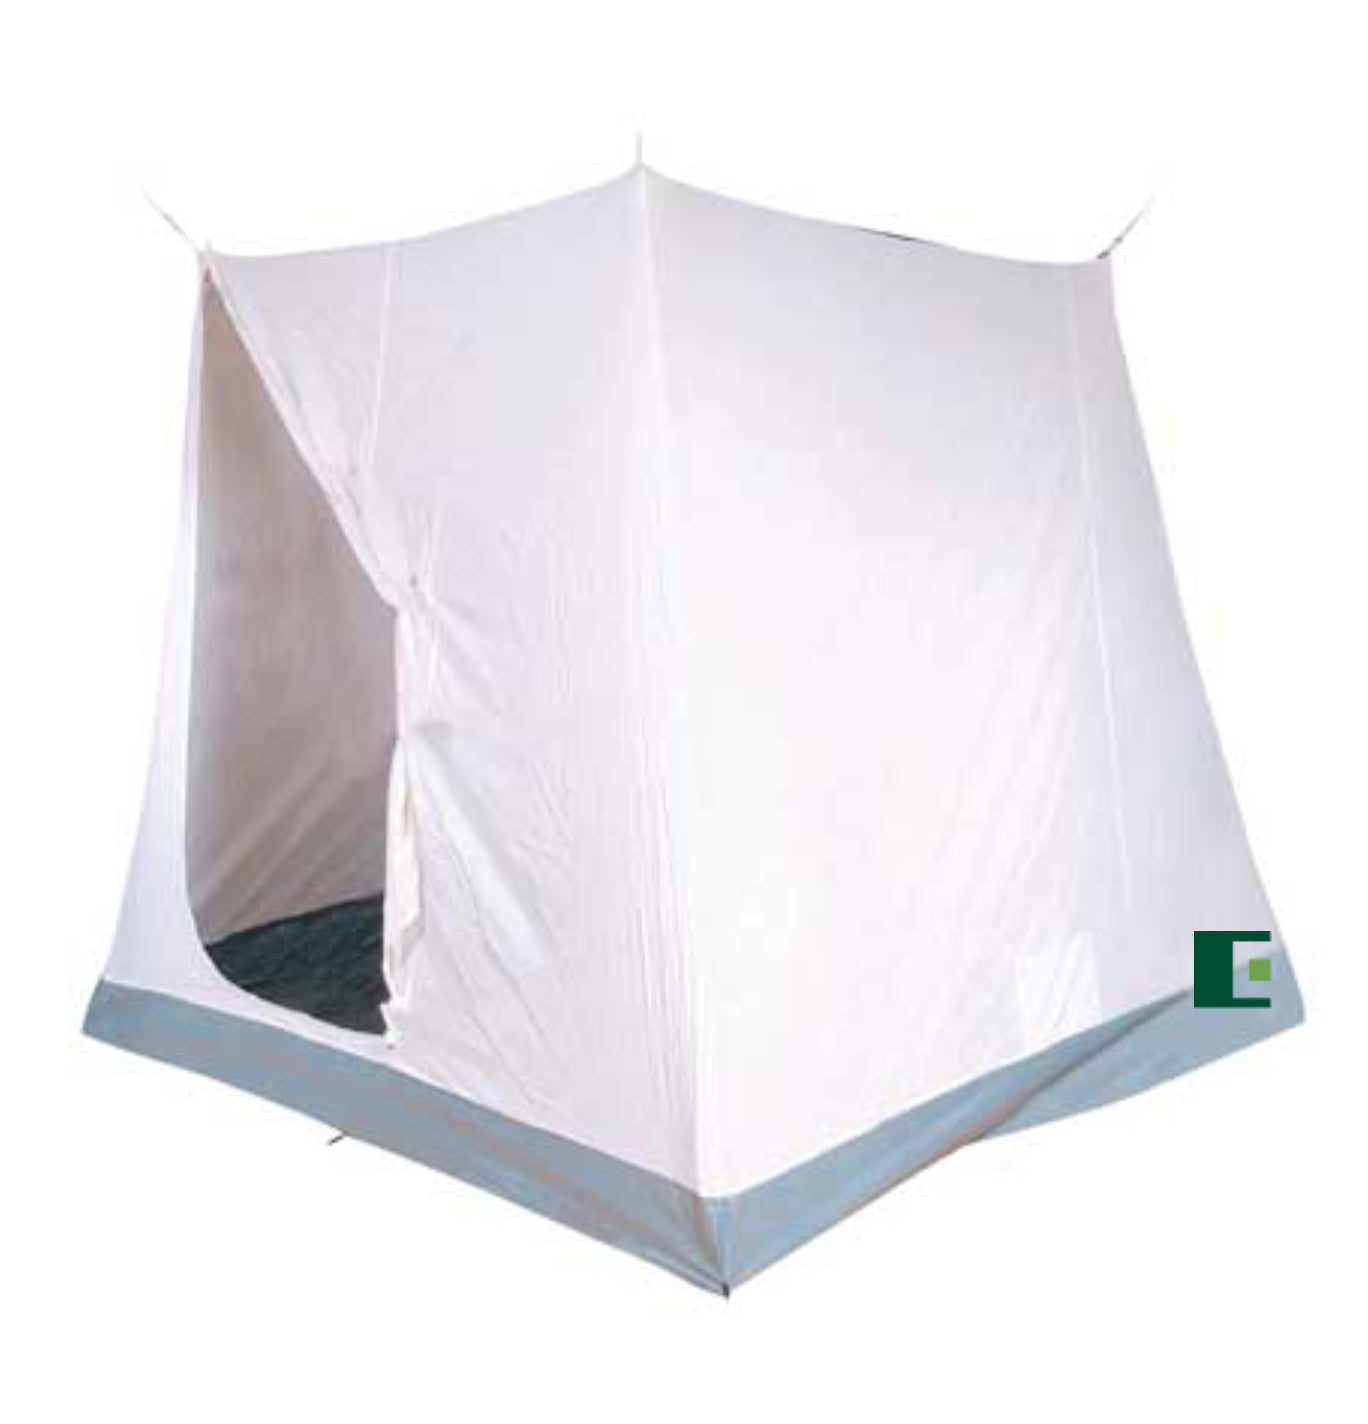 Reimo Upgrade & Update Tailgate Tent Ground Sheet – The Camperco Shop